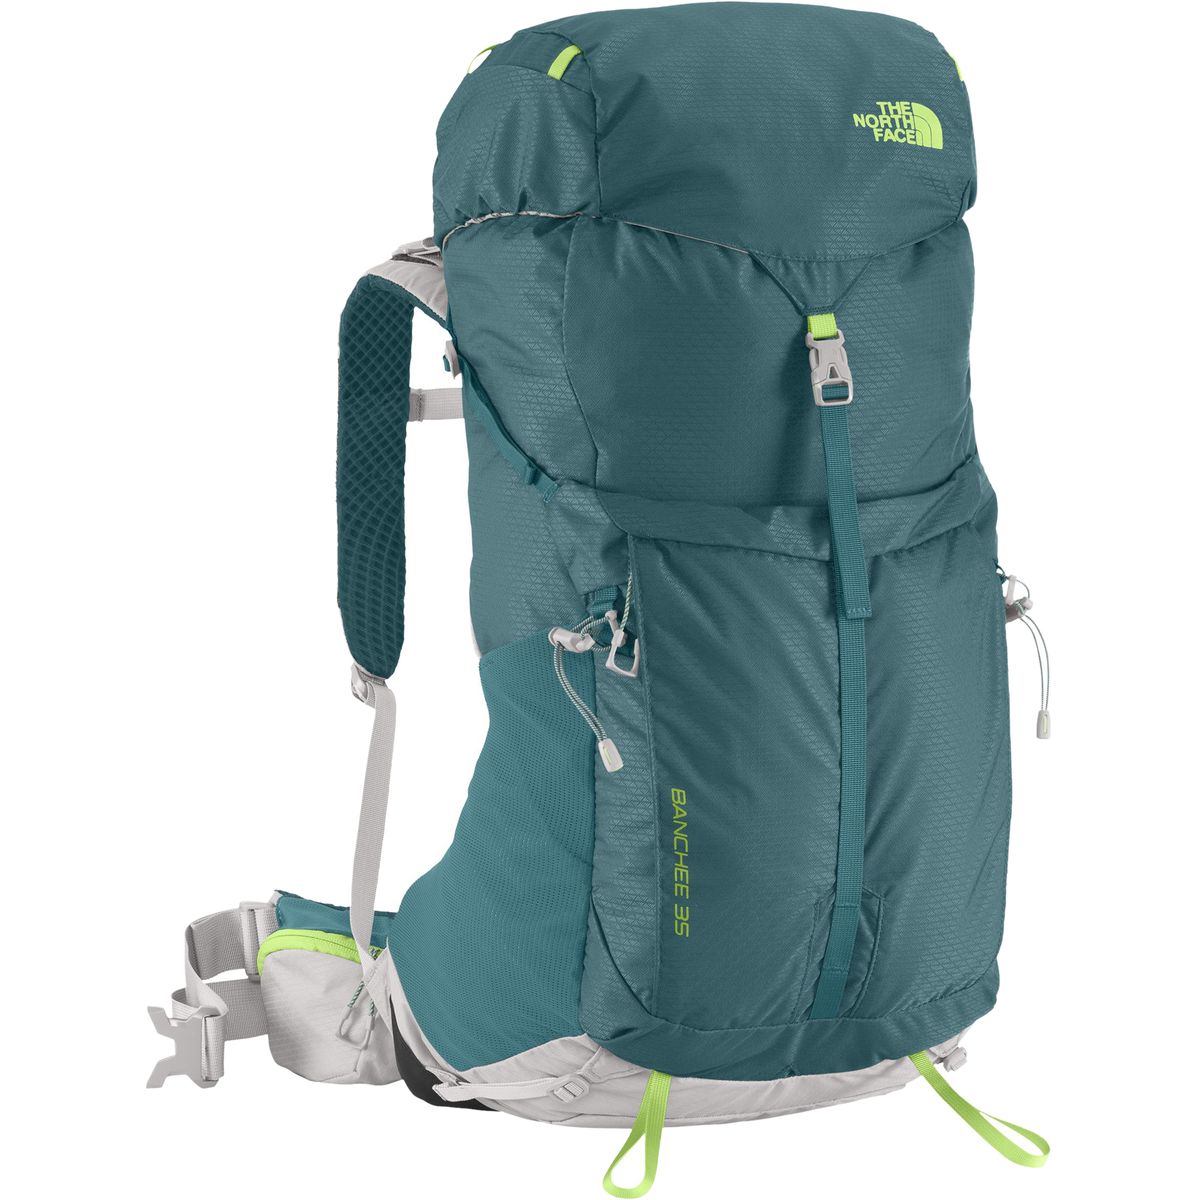 The North Face Banchee 35 Backpack - Women's - 2136cu in - Hike & Camp